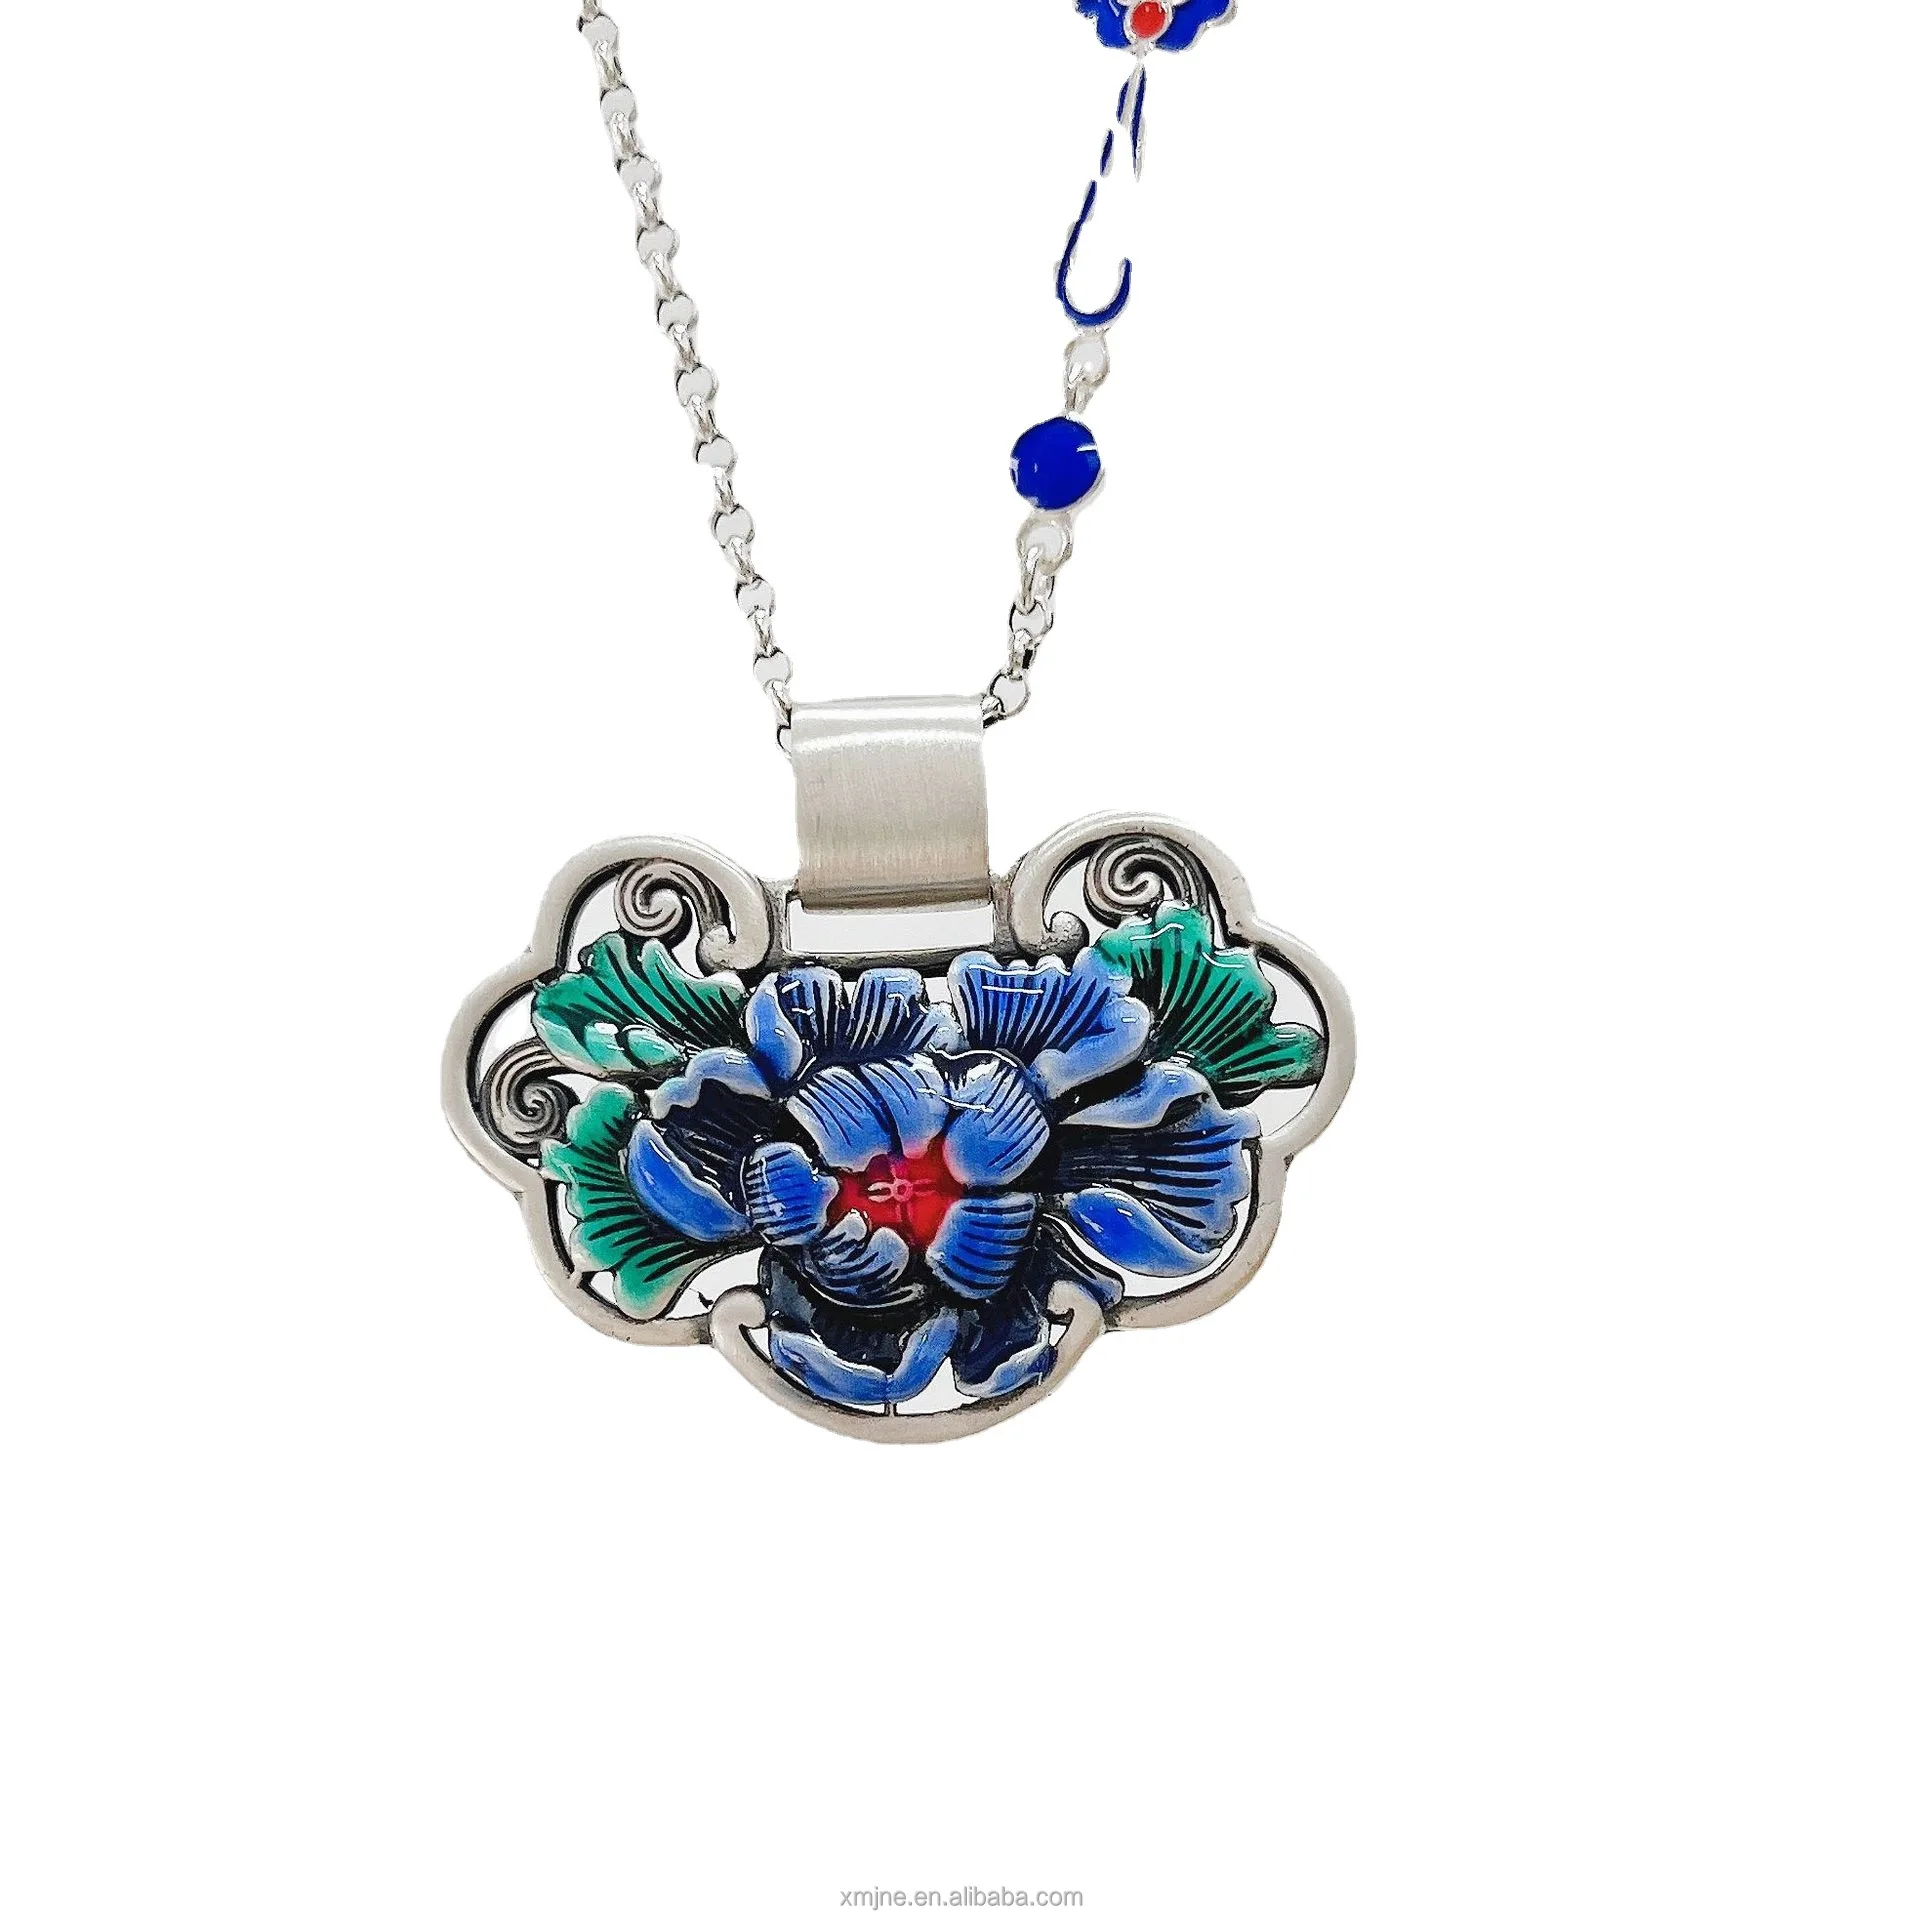 

Certified S999 Peony Flower Padlock National Fashion National Enamel Color Burning Blue Rich Peony Women's Double-Sided Pendant